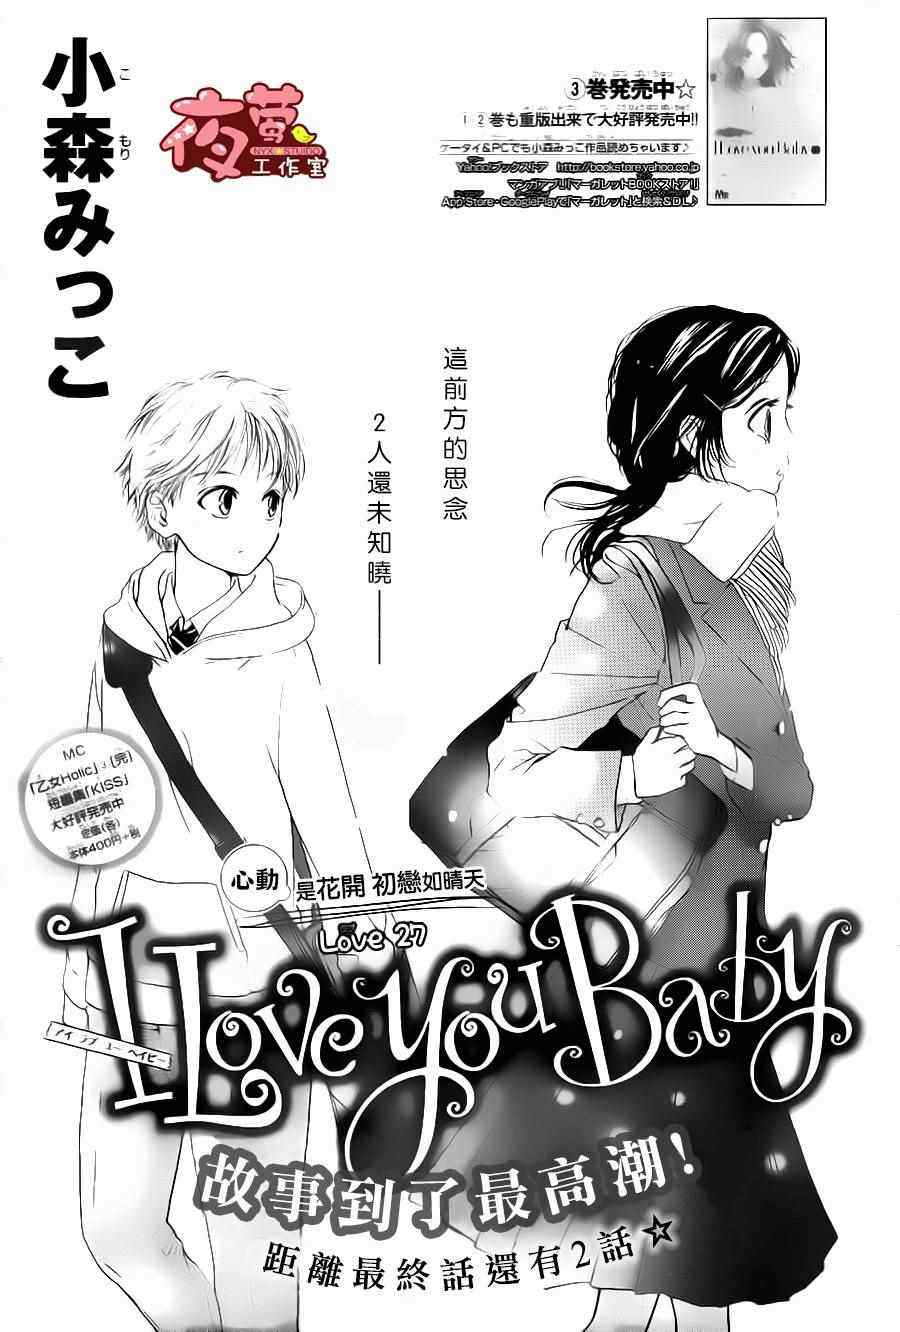 I love you baby - 第27话 - 1